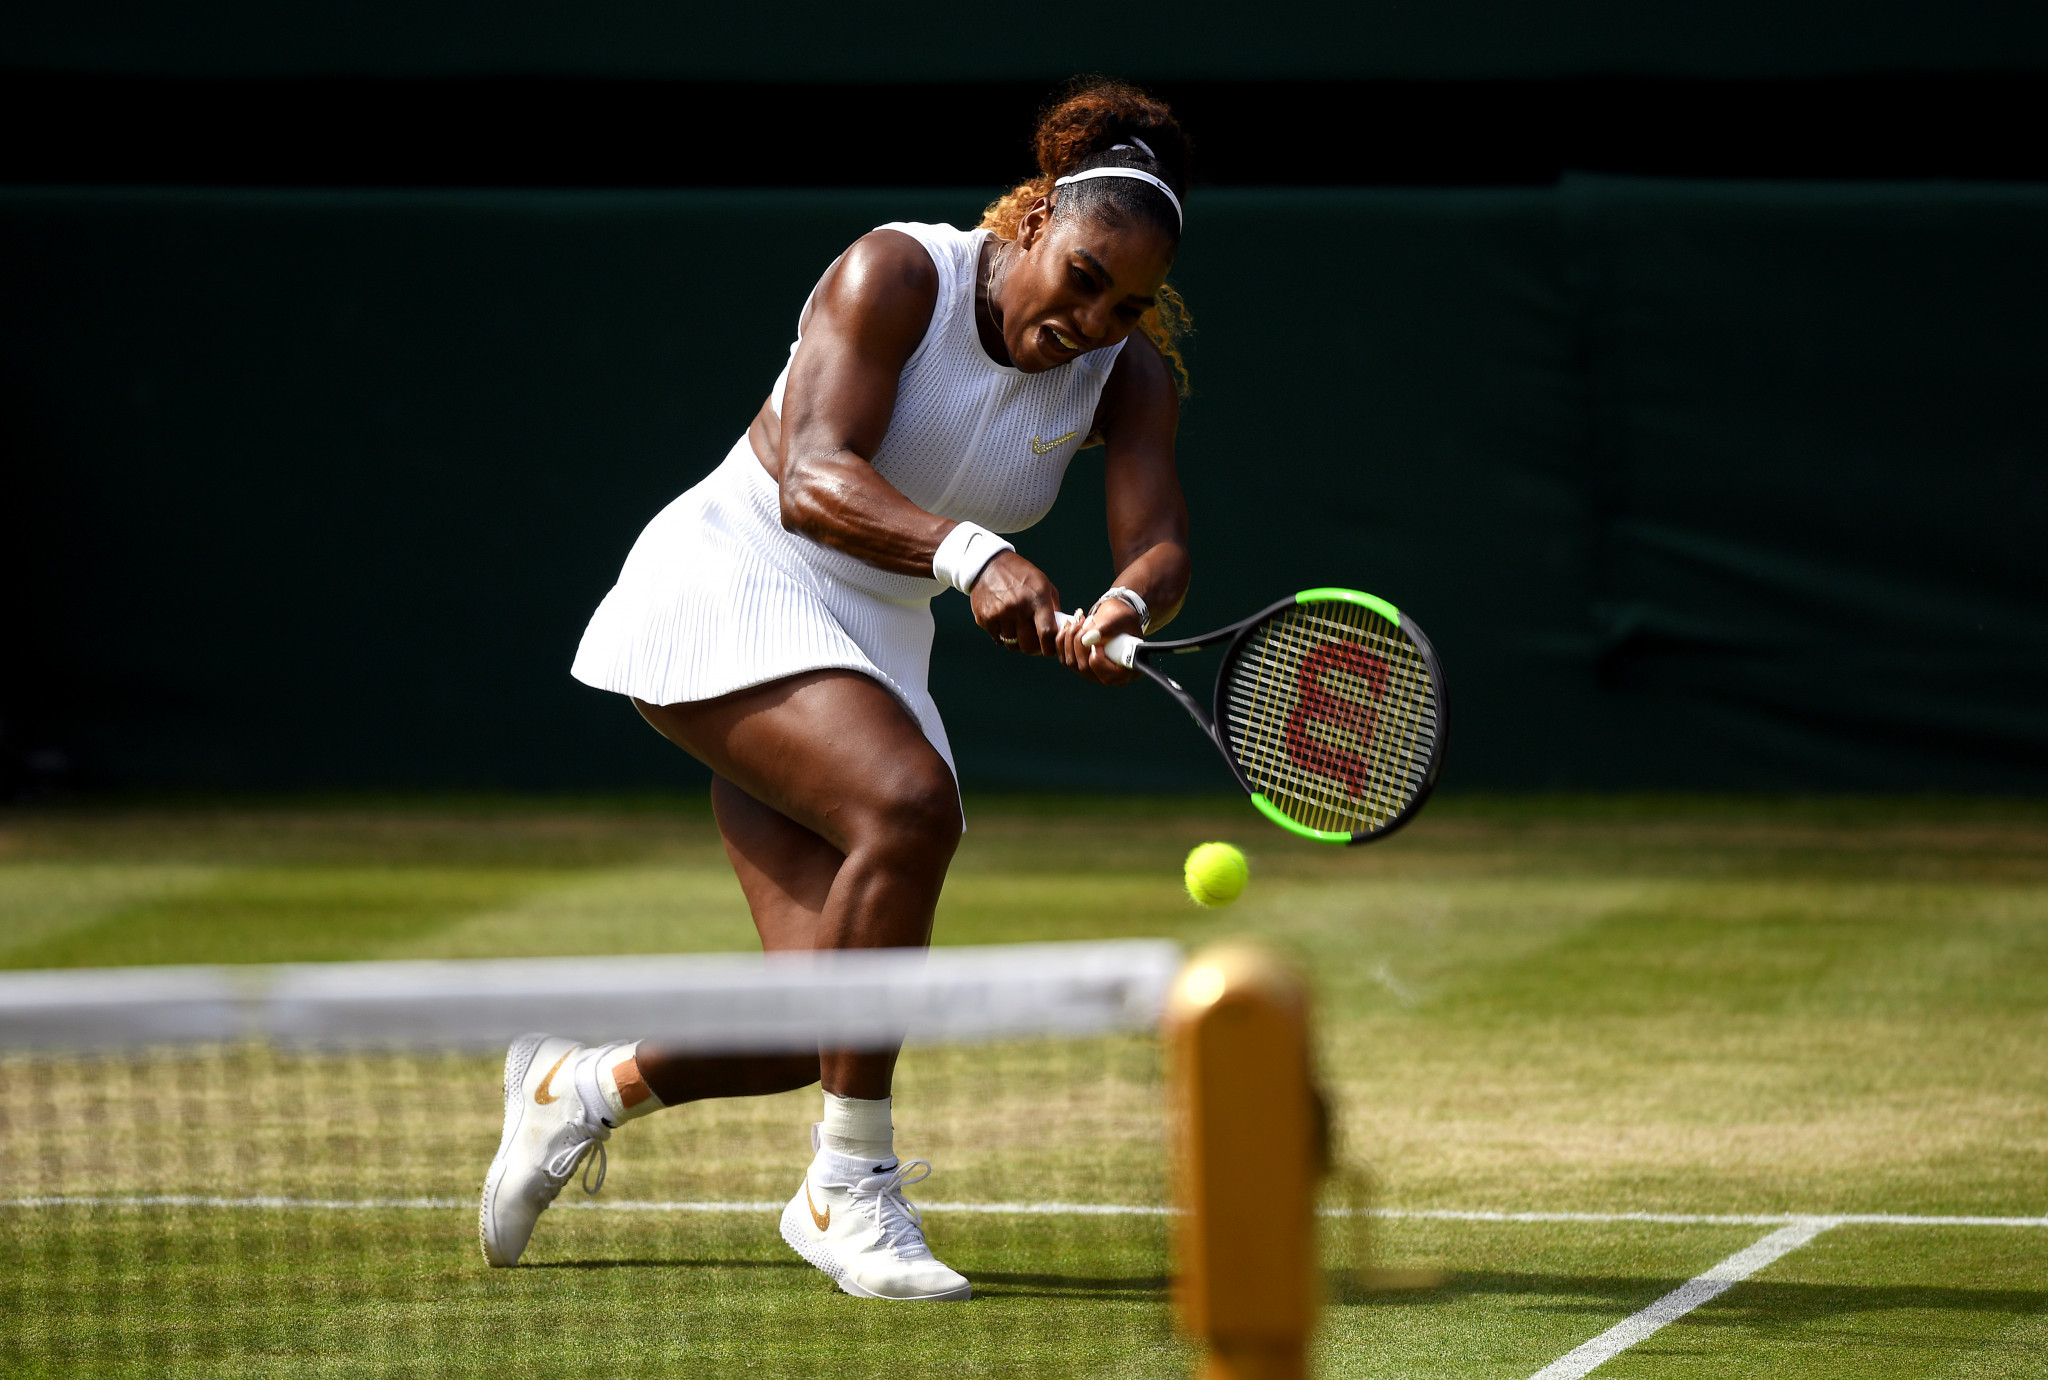 Seven-times champion Serena Williams powered into the final with an easy victory over Czech Republic's Barbora Strýcová ©Getty Images